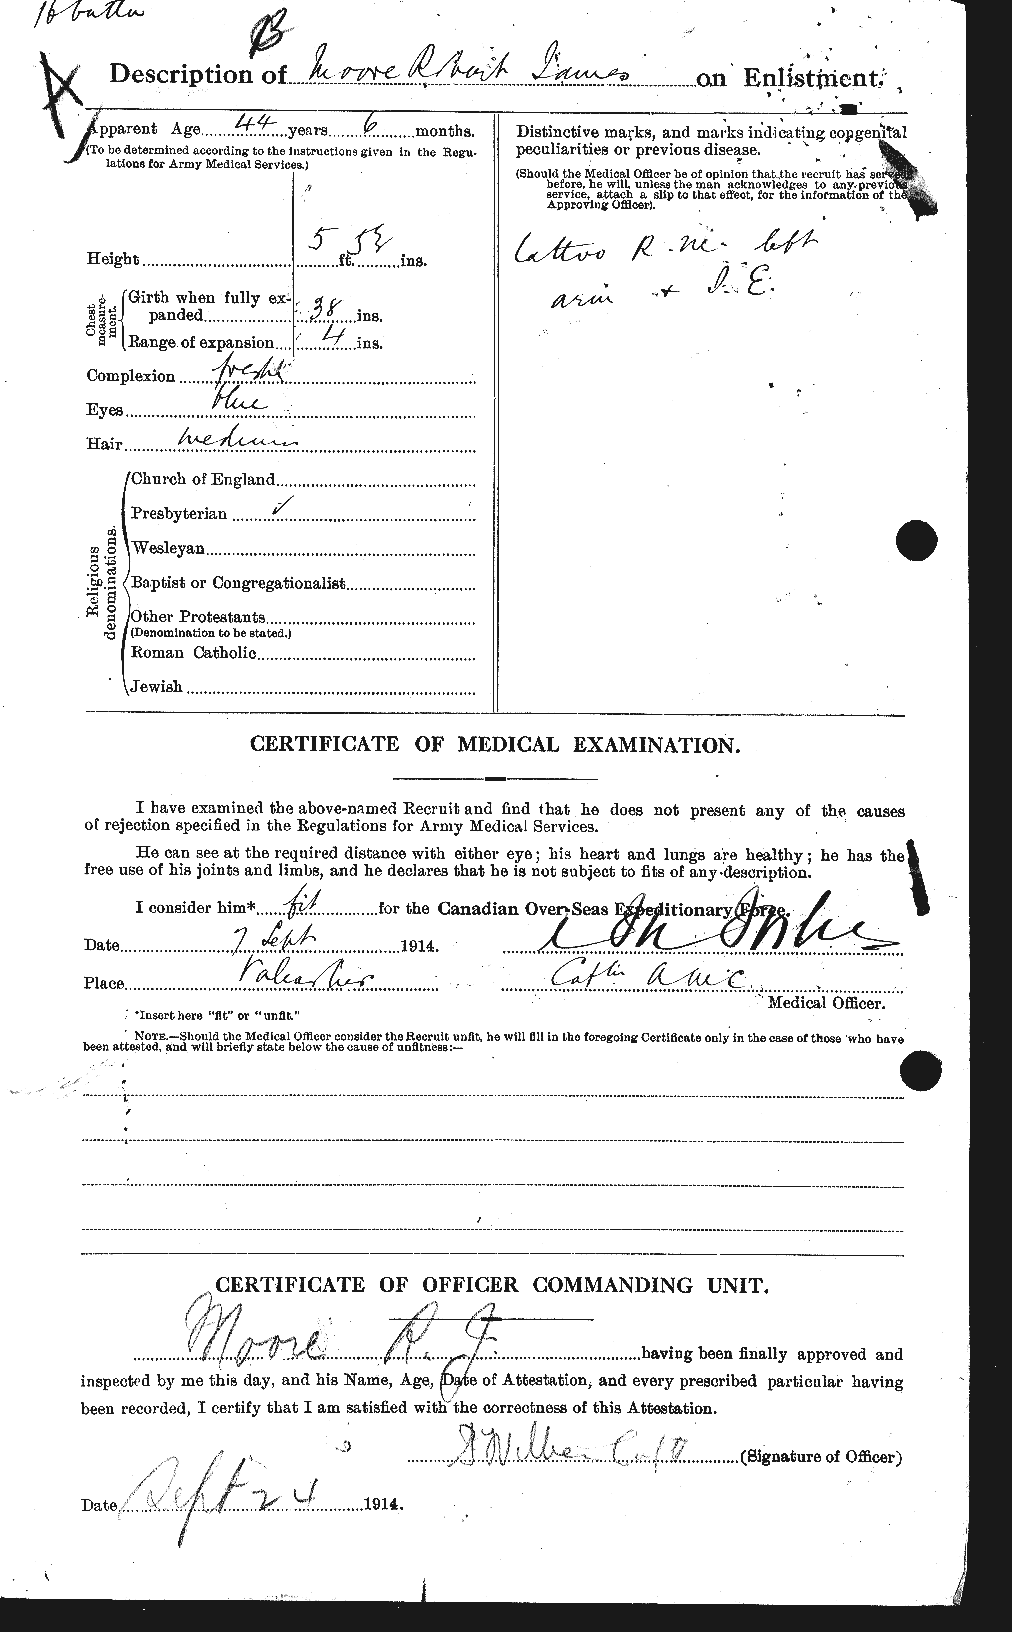 Personnel Records of the First World War - CEF 503574b